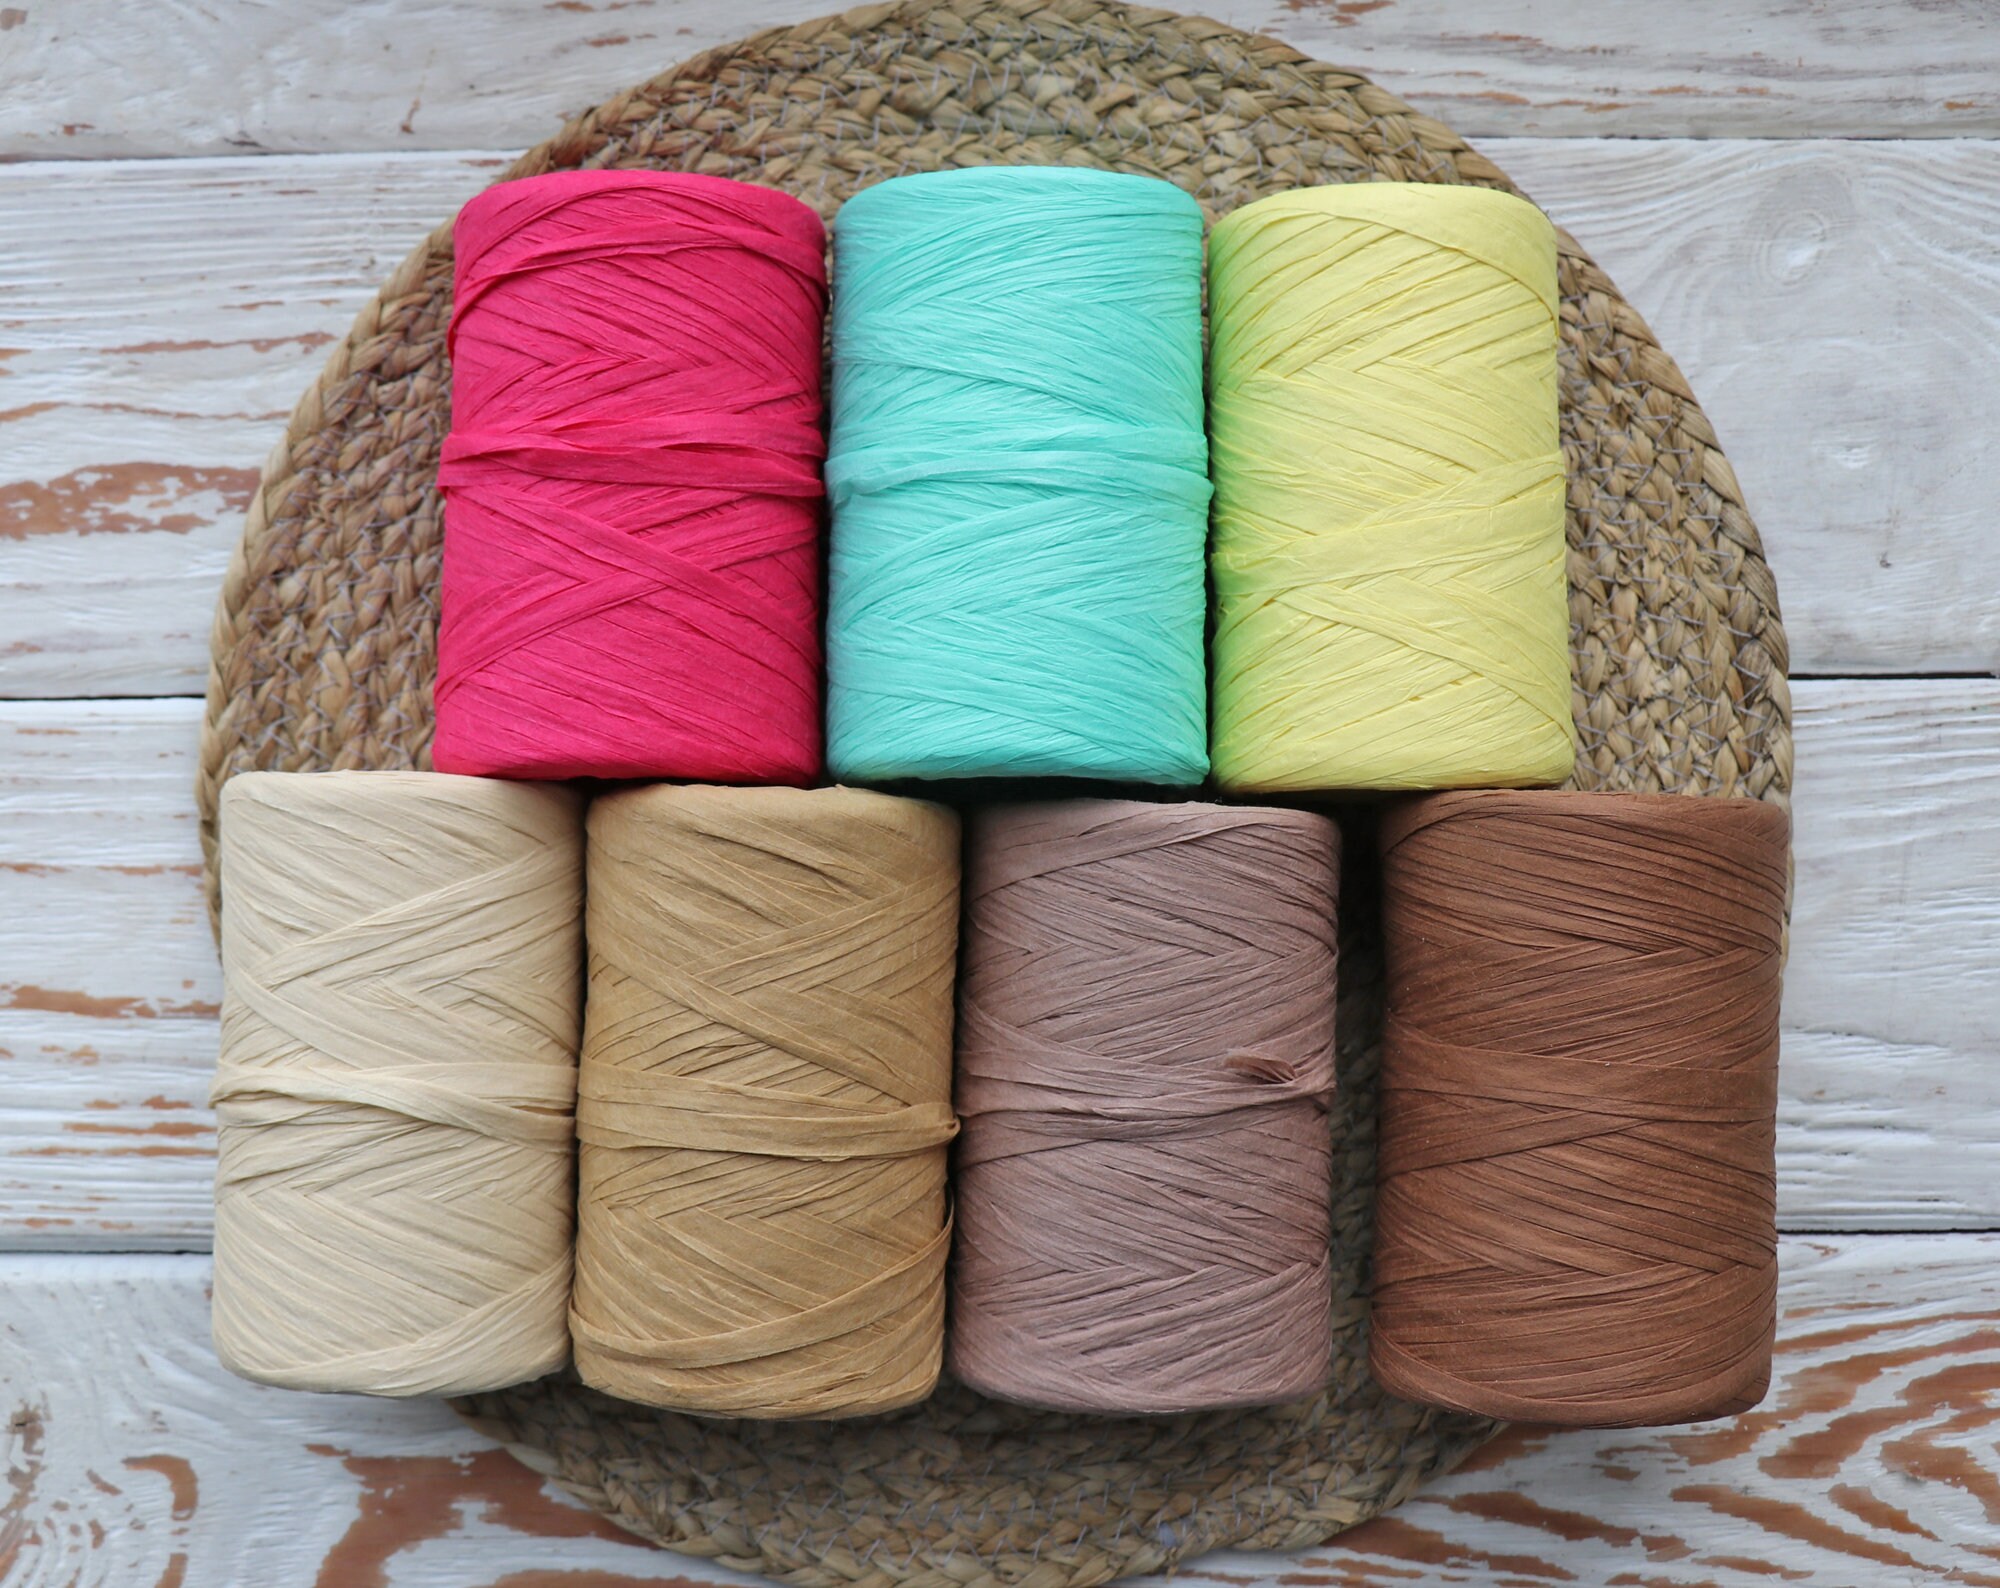 100% Bamboo Yarn Hand Knitting Crochet Worsted Weight Cool Summer For Baby  Garments Scarves Hats Bag and Craft Projects - AliExpress